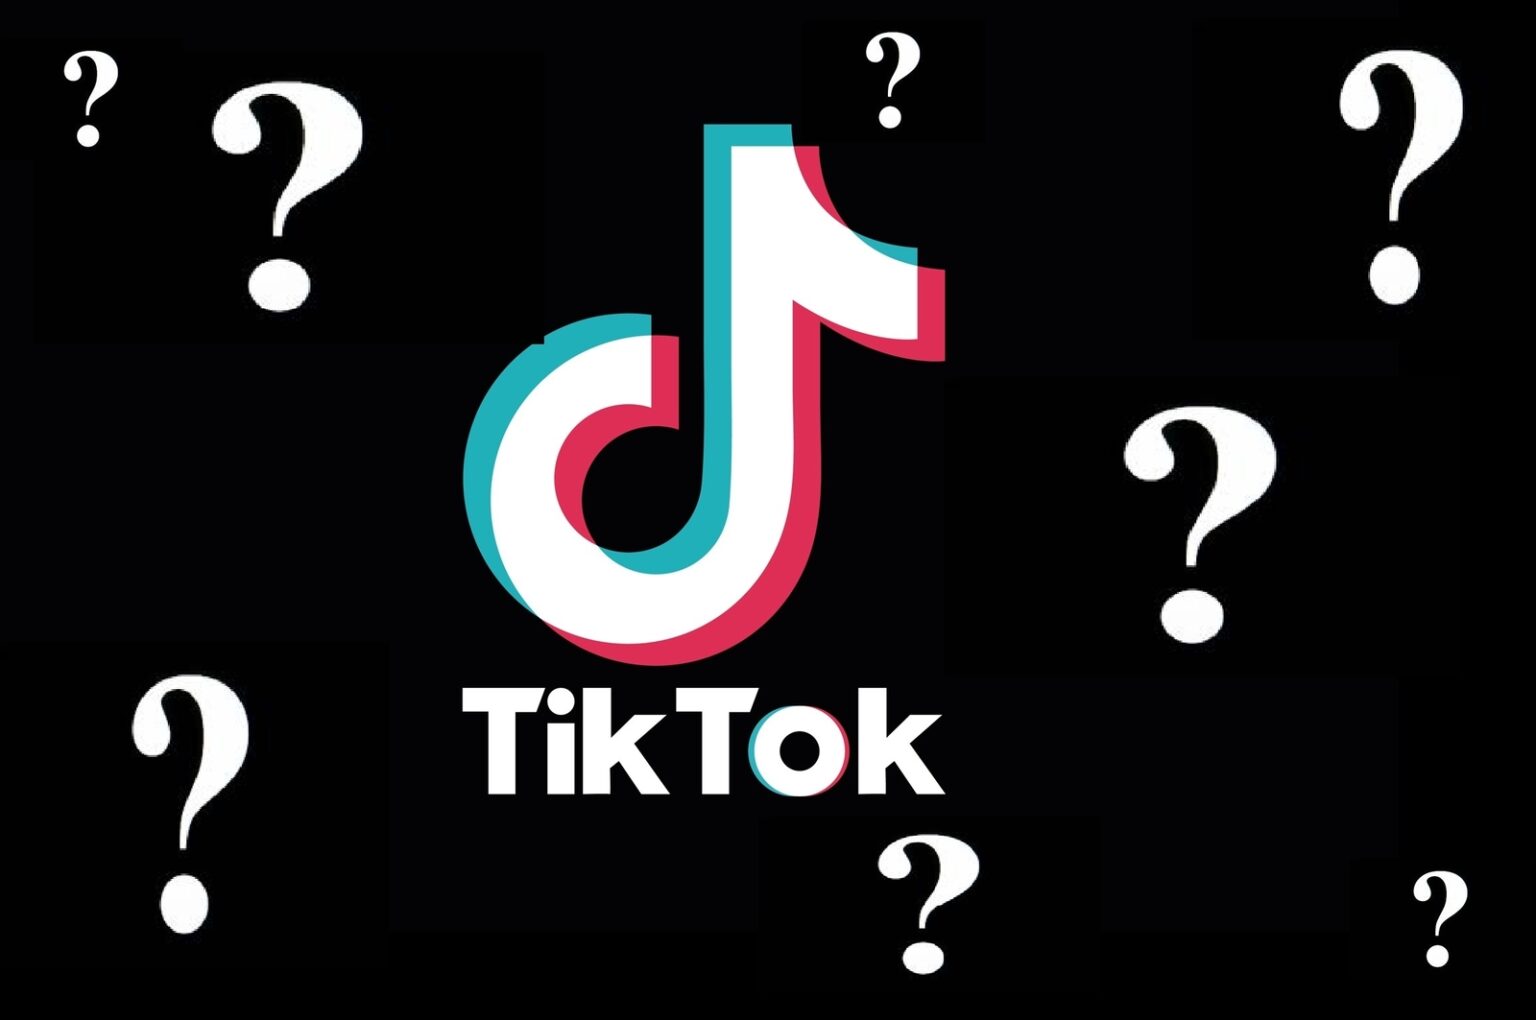 Remember the TikTok debacle? Donald Trump, in his final summer as president, declared that the app would be banned. What did the owner say?